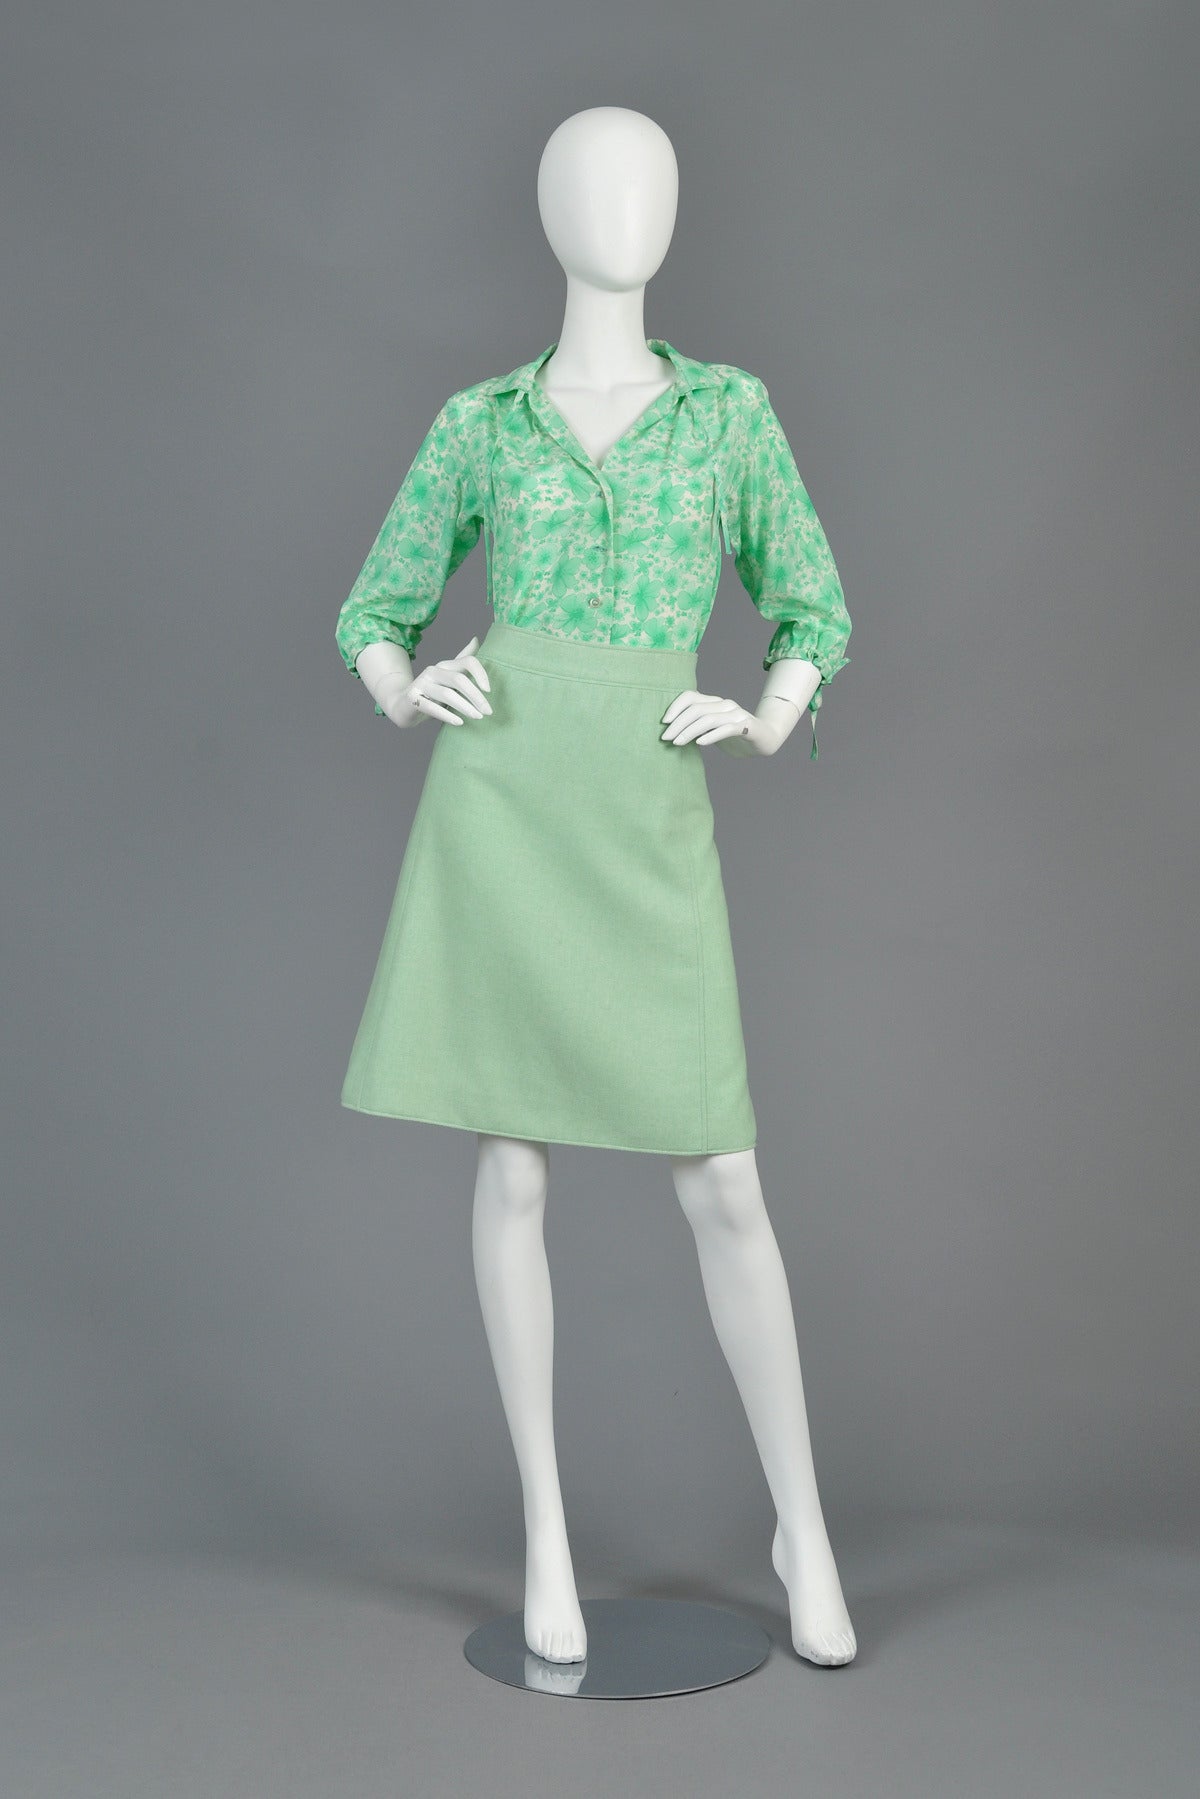 Classic vintage 1960s/70s Courrèges sage green mod skirt. Simple, flattering shape with perfect stitched details. Concealed zipper on back quarter. Twilled wool blend. Fully labeled. Excellent vintage condition.

MEASUREMENTS
Waist: 24.5